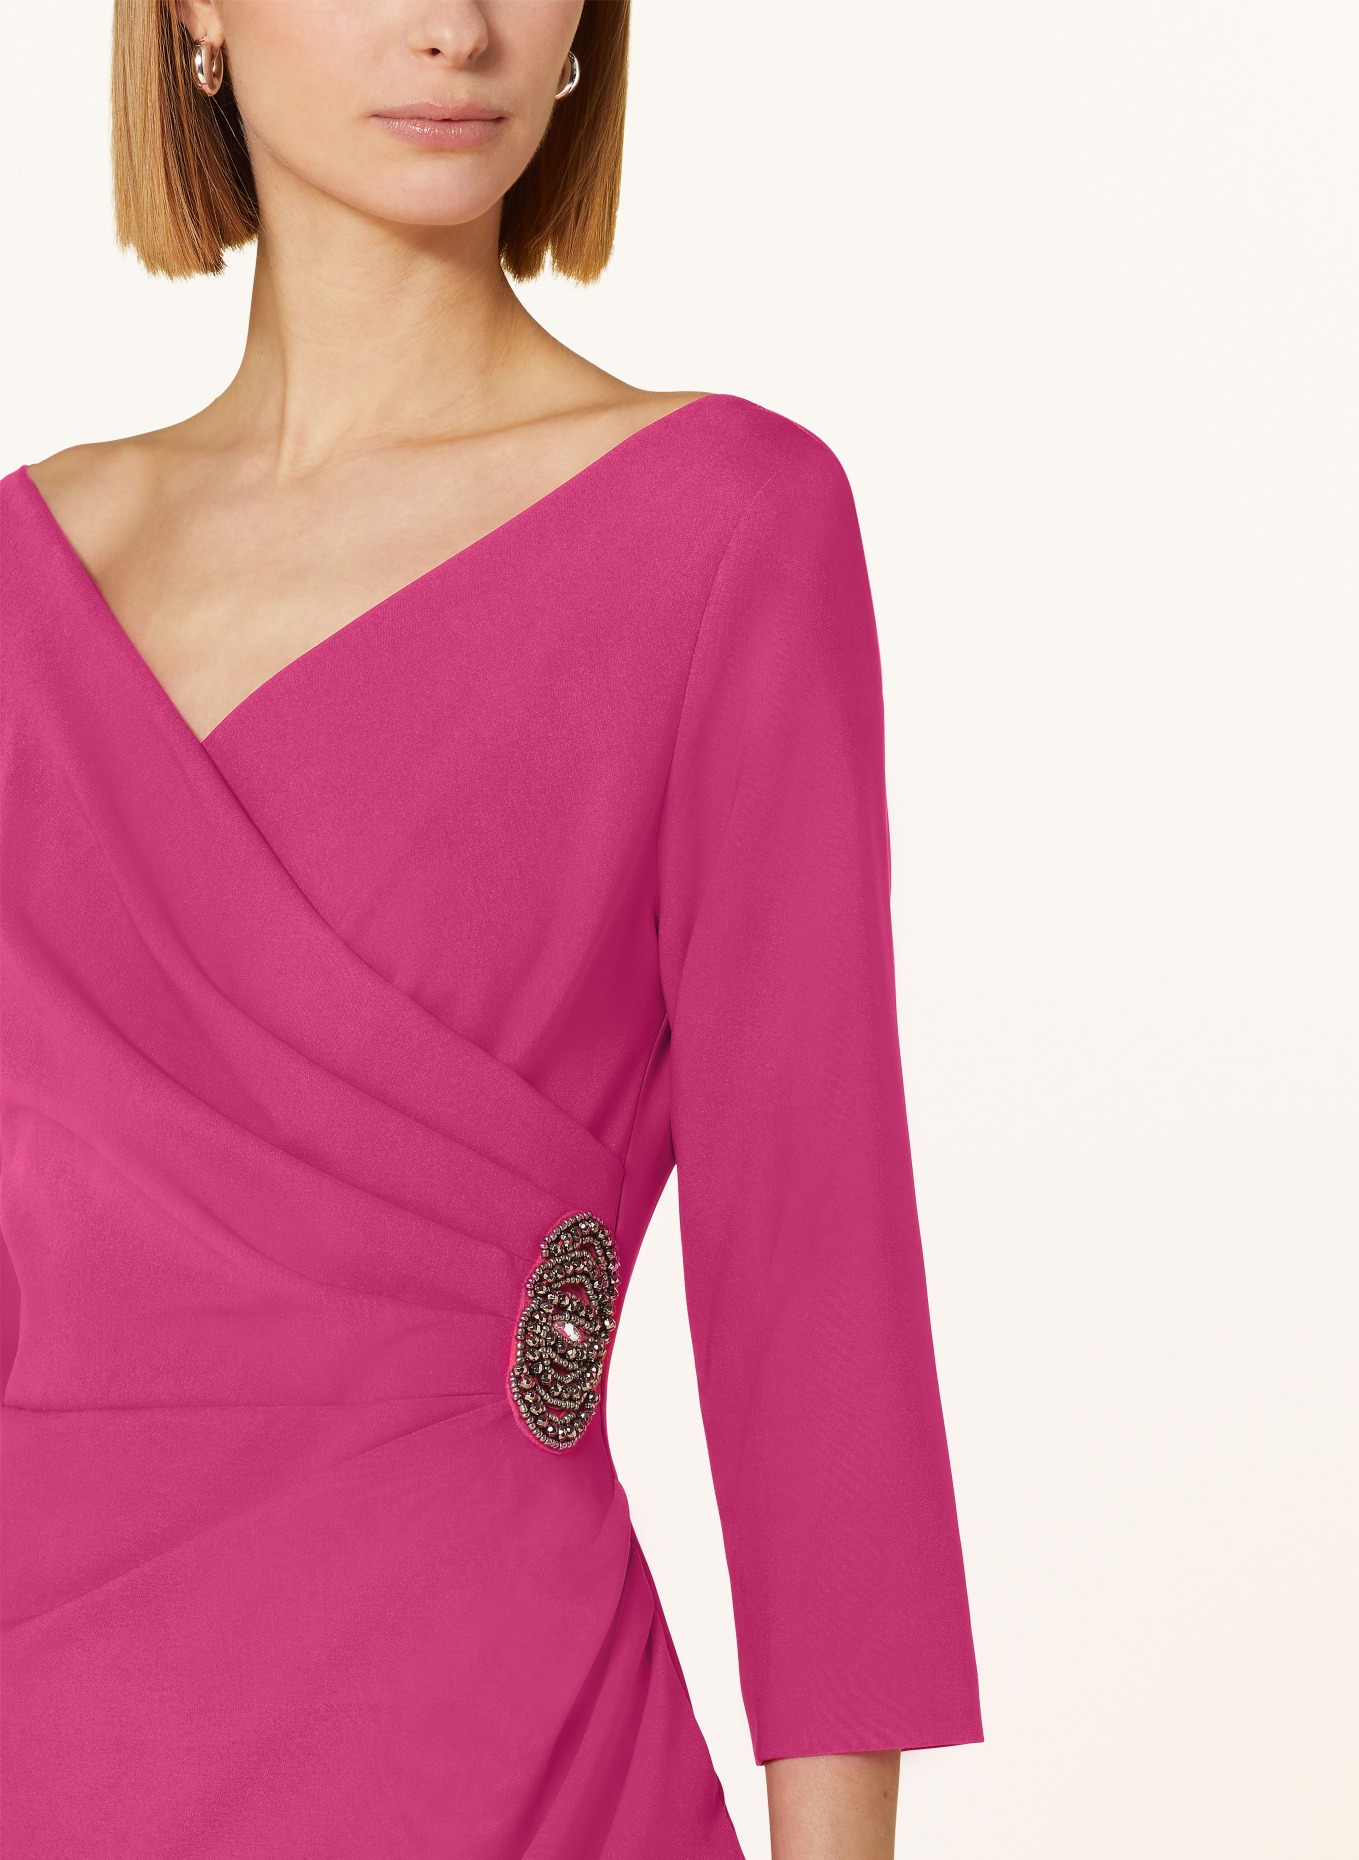 Joseph Ribkoff SIGNATURE Cocktail dress with 3/4 sleeves, Color: PINK (Image 4)